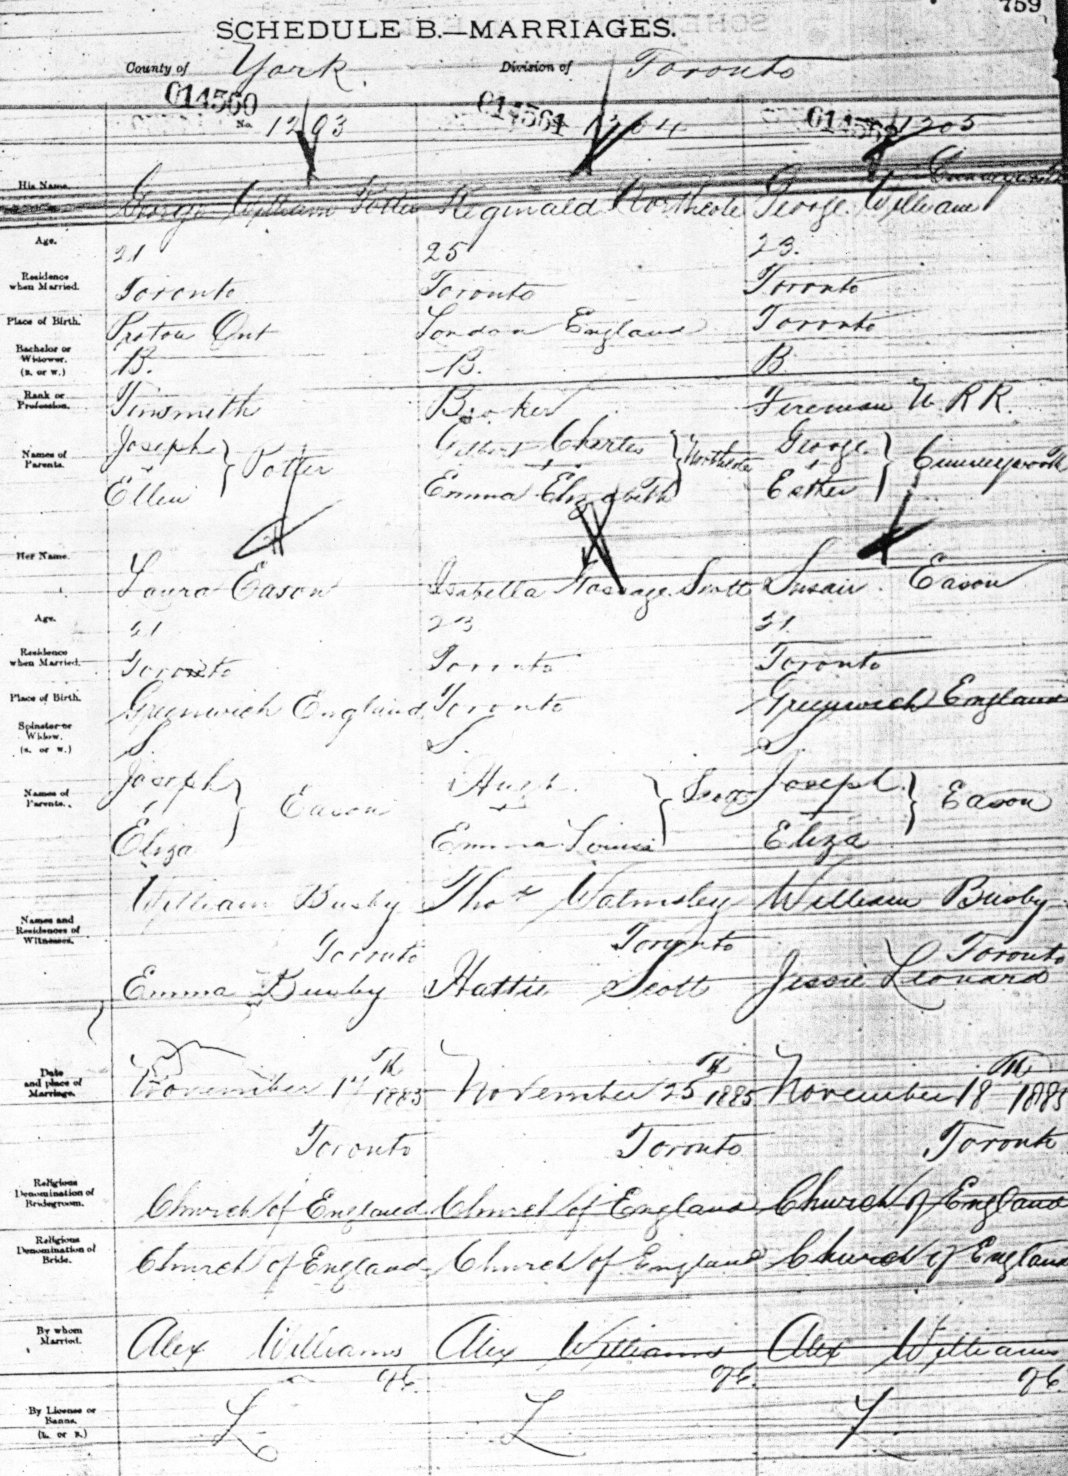 George and Laura's marriage registration